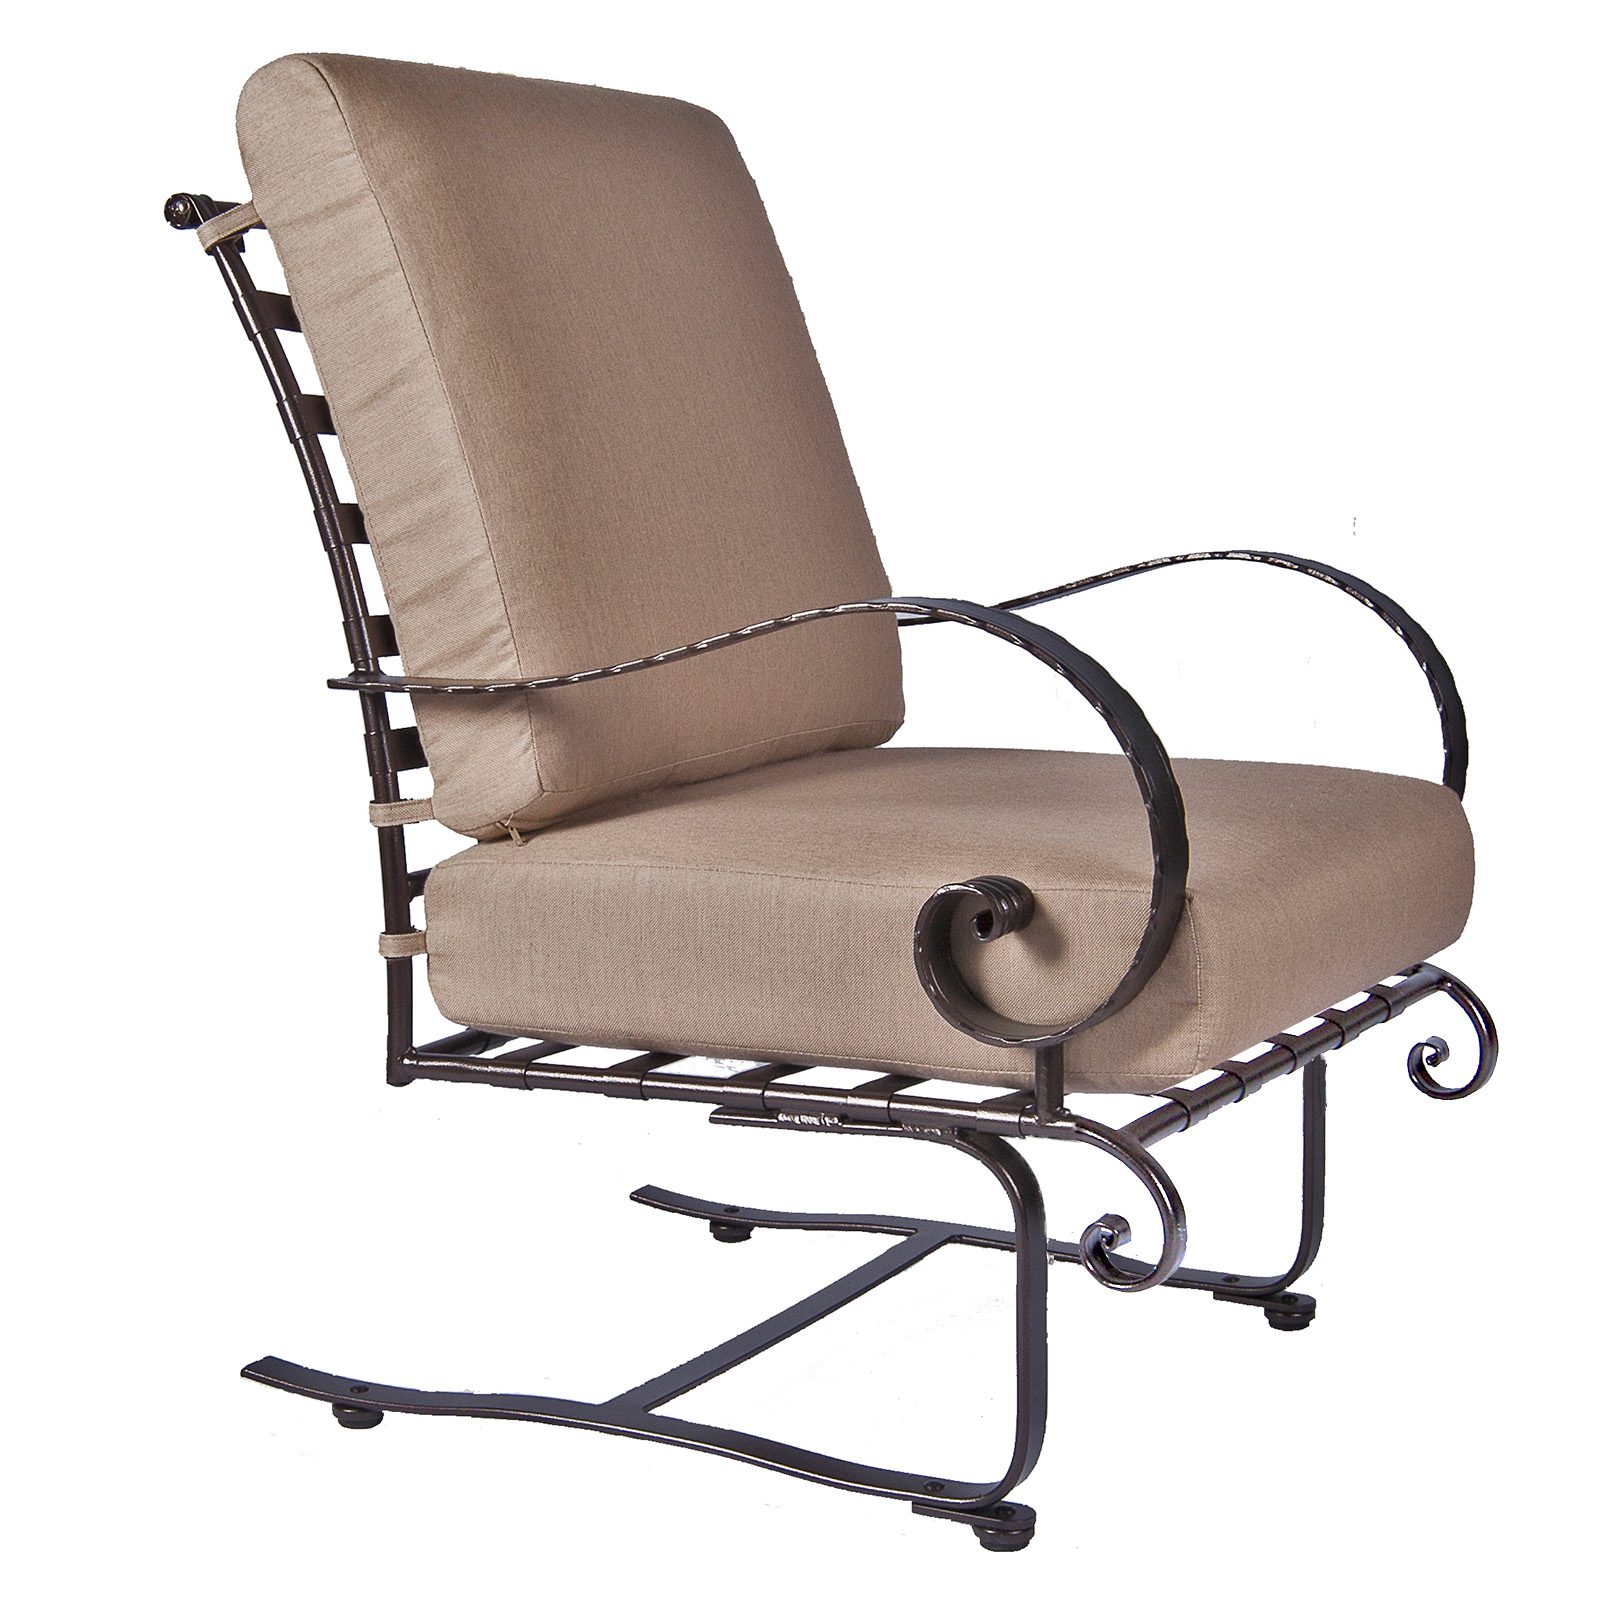 Spring Base Lounge Chair - Wrought Iron & Steel - Classico-W 25